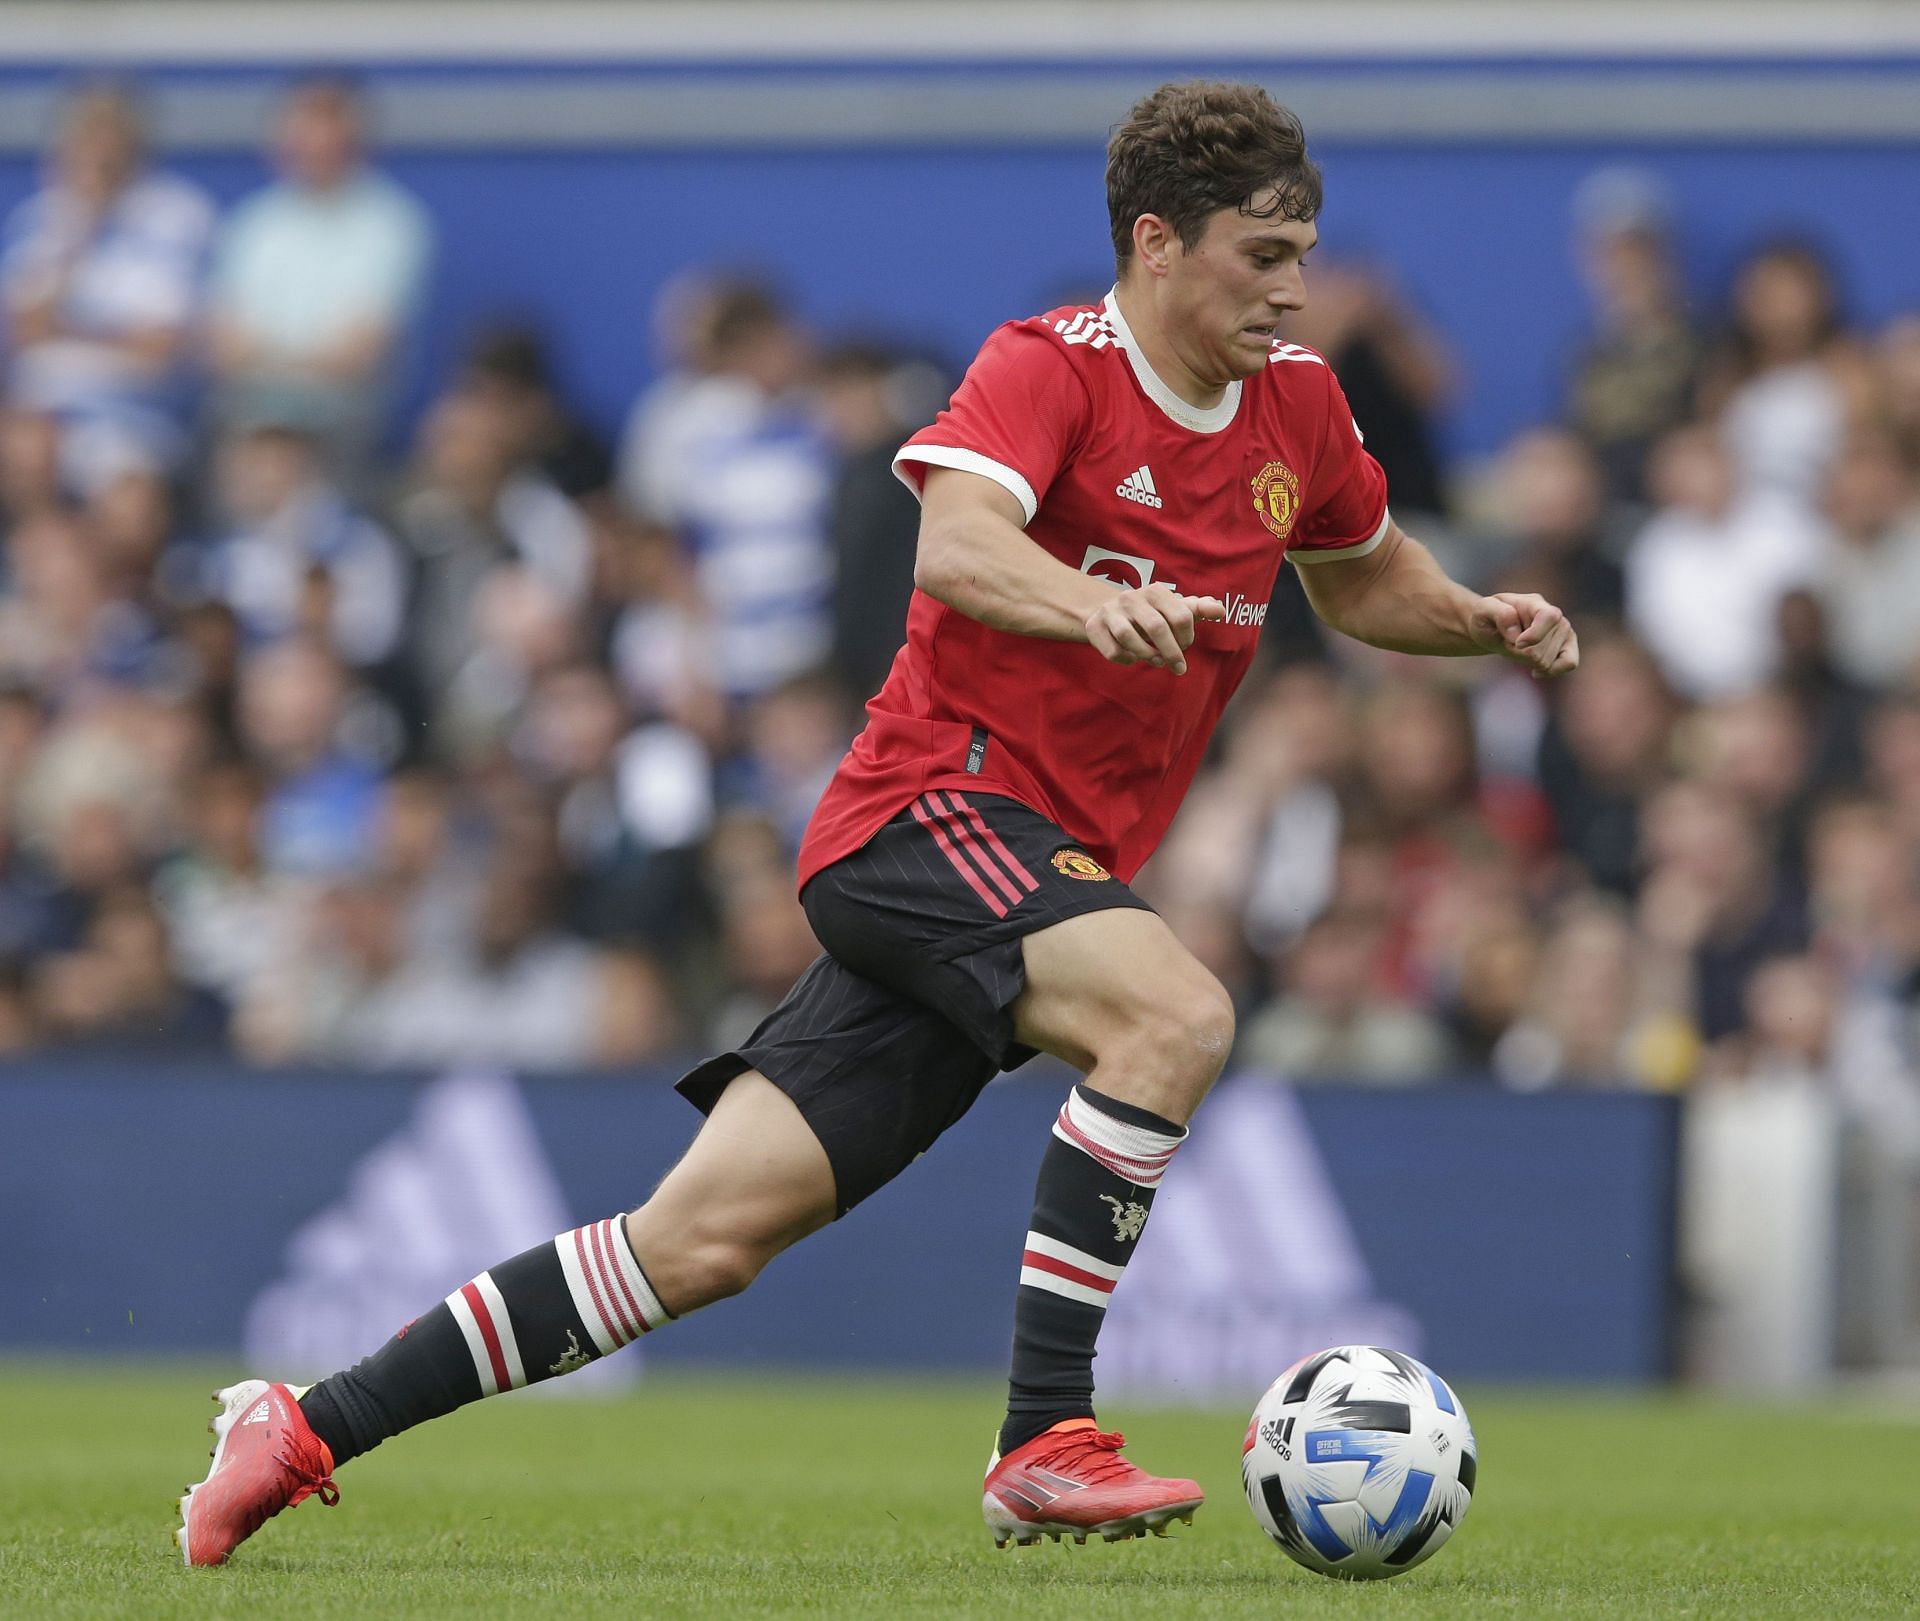 Daniel James was inconsistent at Manchester United after a bright start.